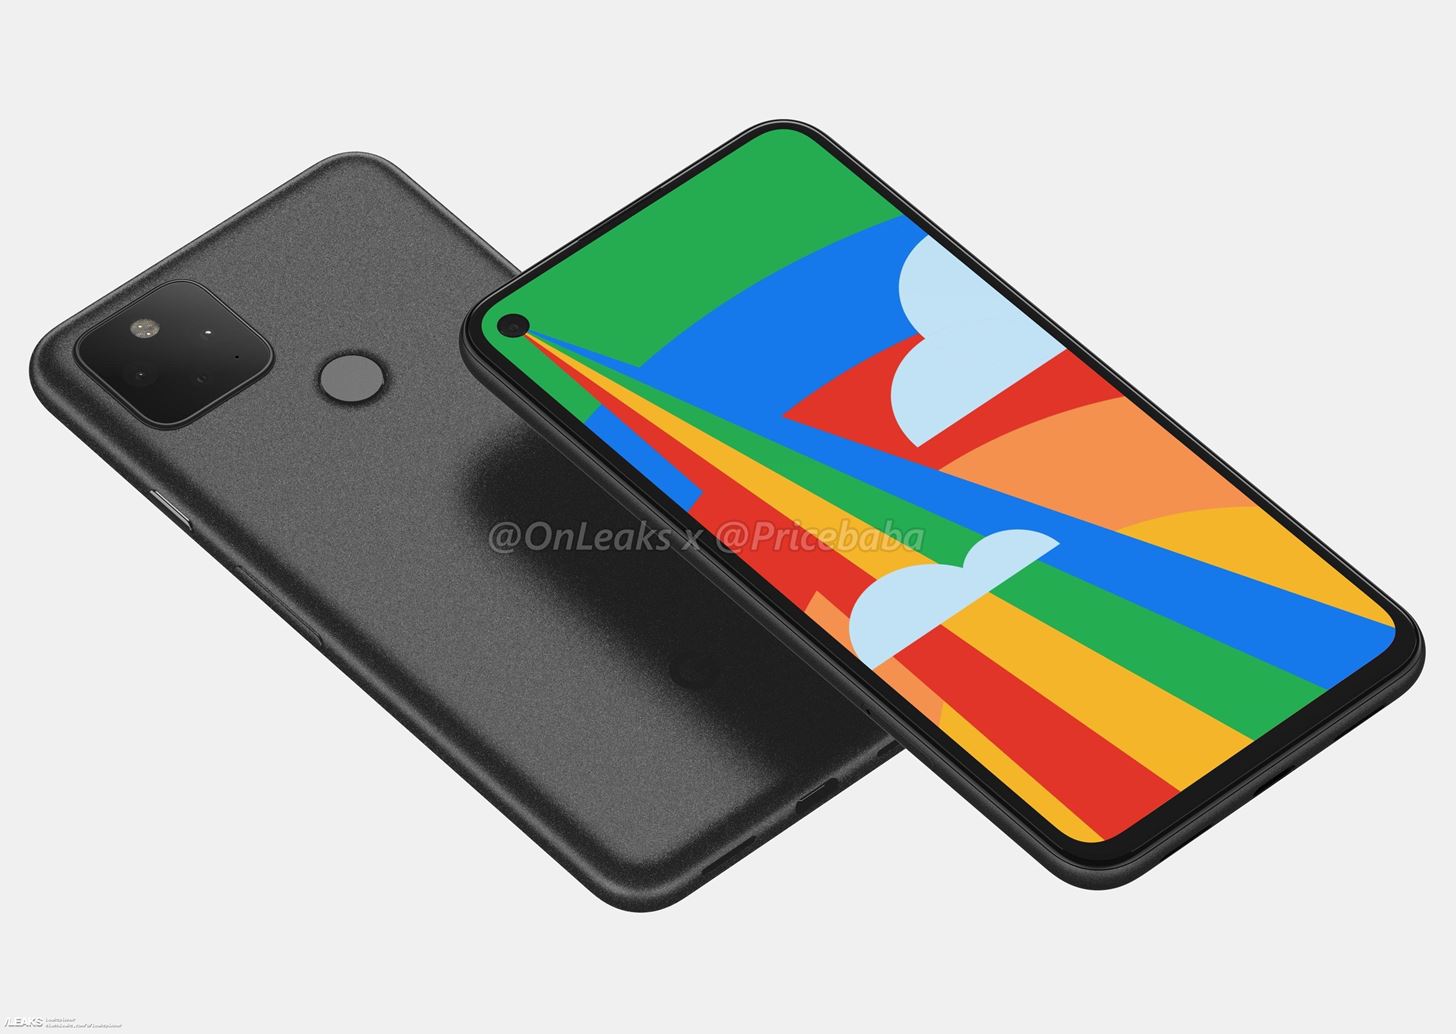 The Latest Google Pixel 5 Rumors, Leaks & Specs That We Know About